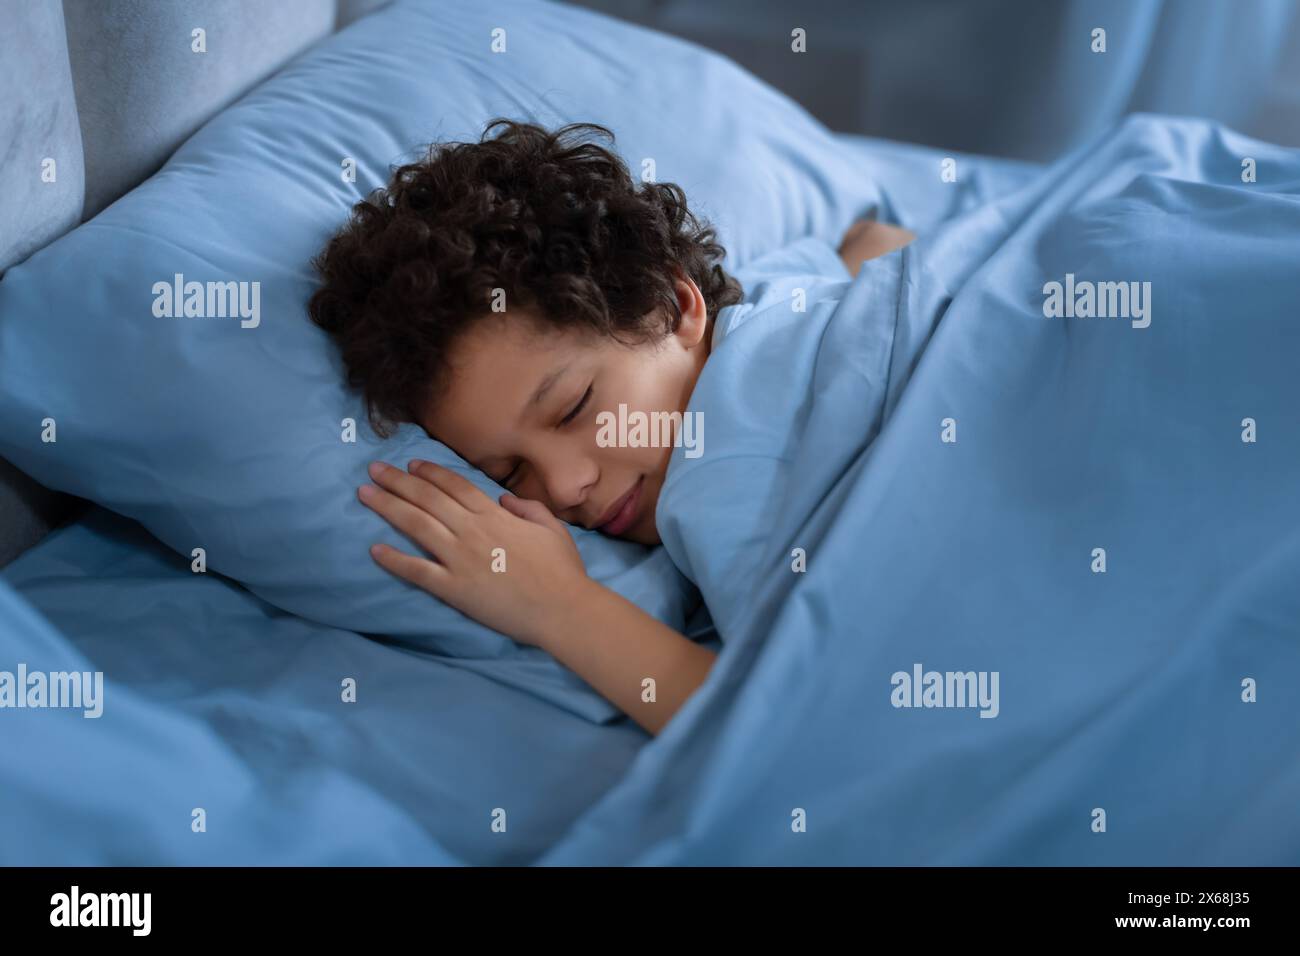 Young Boy Sleeping in Bed With Blue Sheets at Night Stock Photo